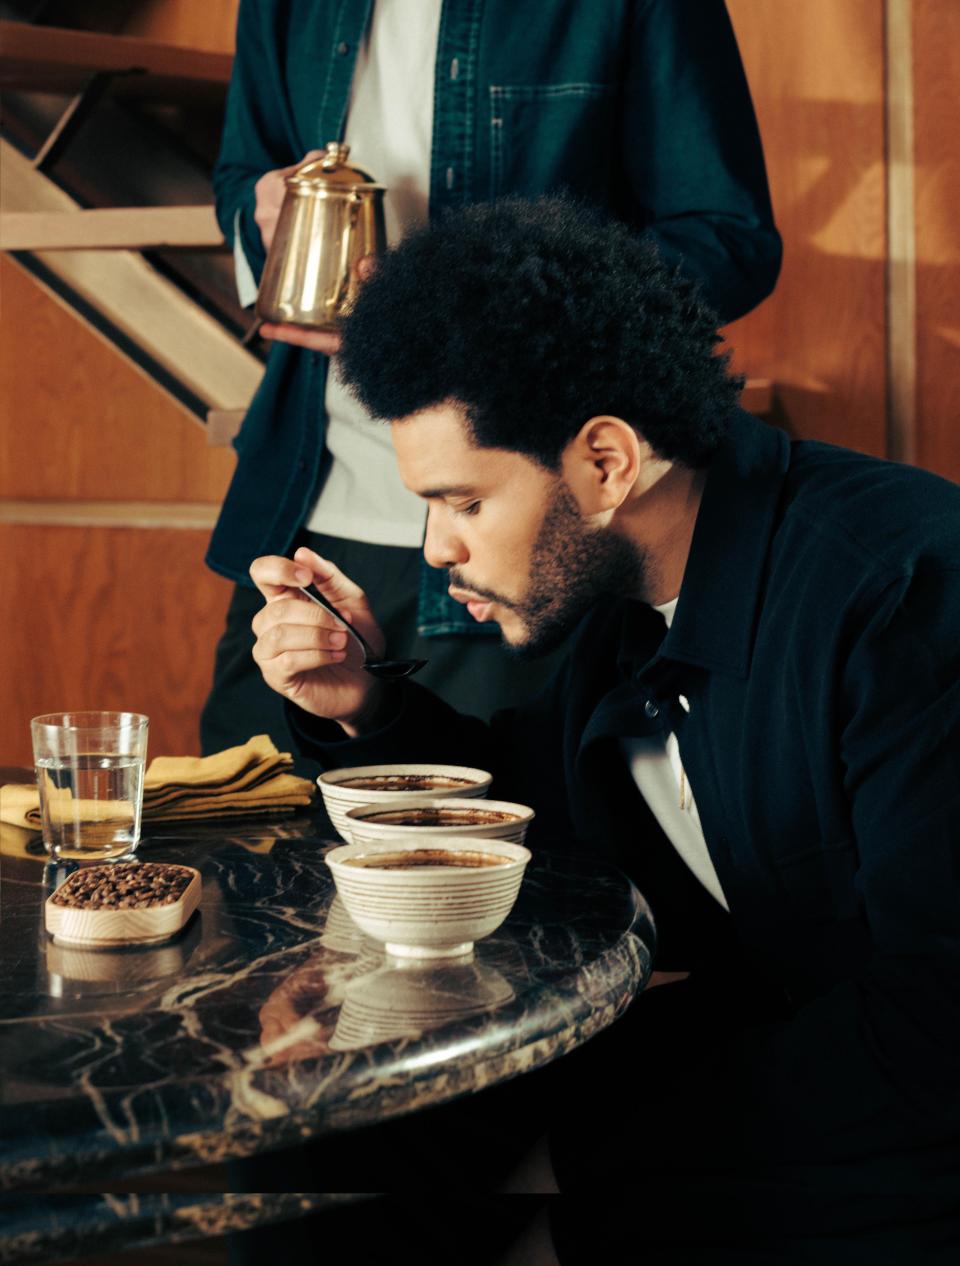 The Weeknd has partnered with Oakland, California-based specialty coffee company Blue Bottle Coffee on Samra Origins, a new brand of coffee, with the first becoming available May 9.